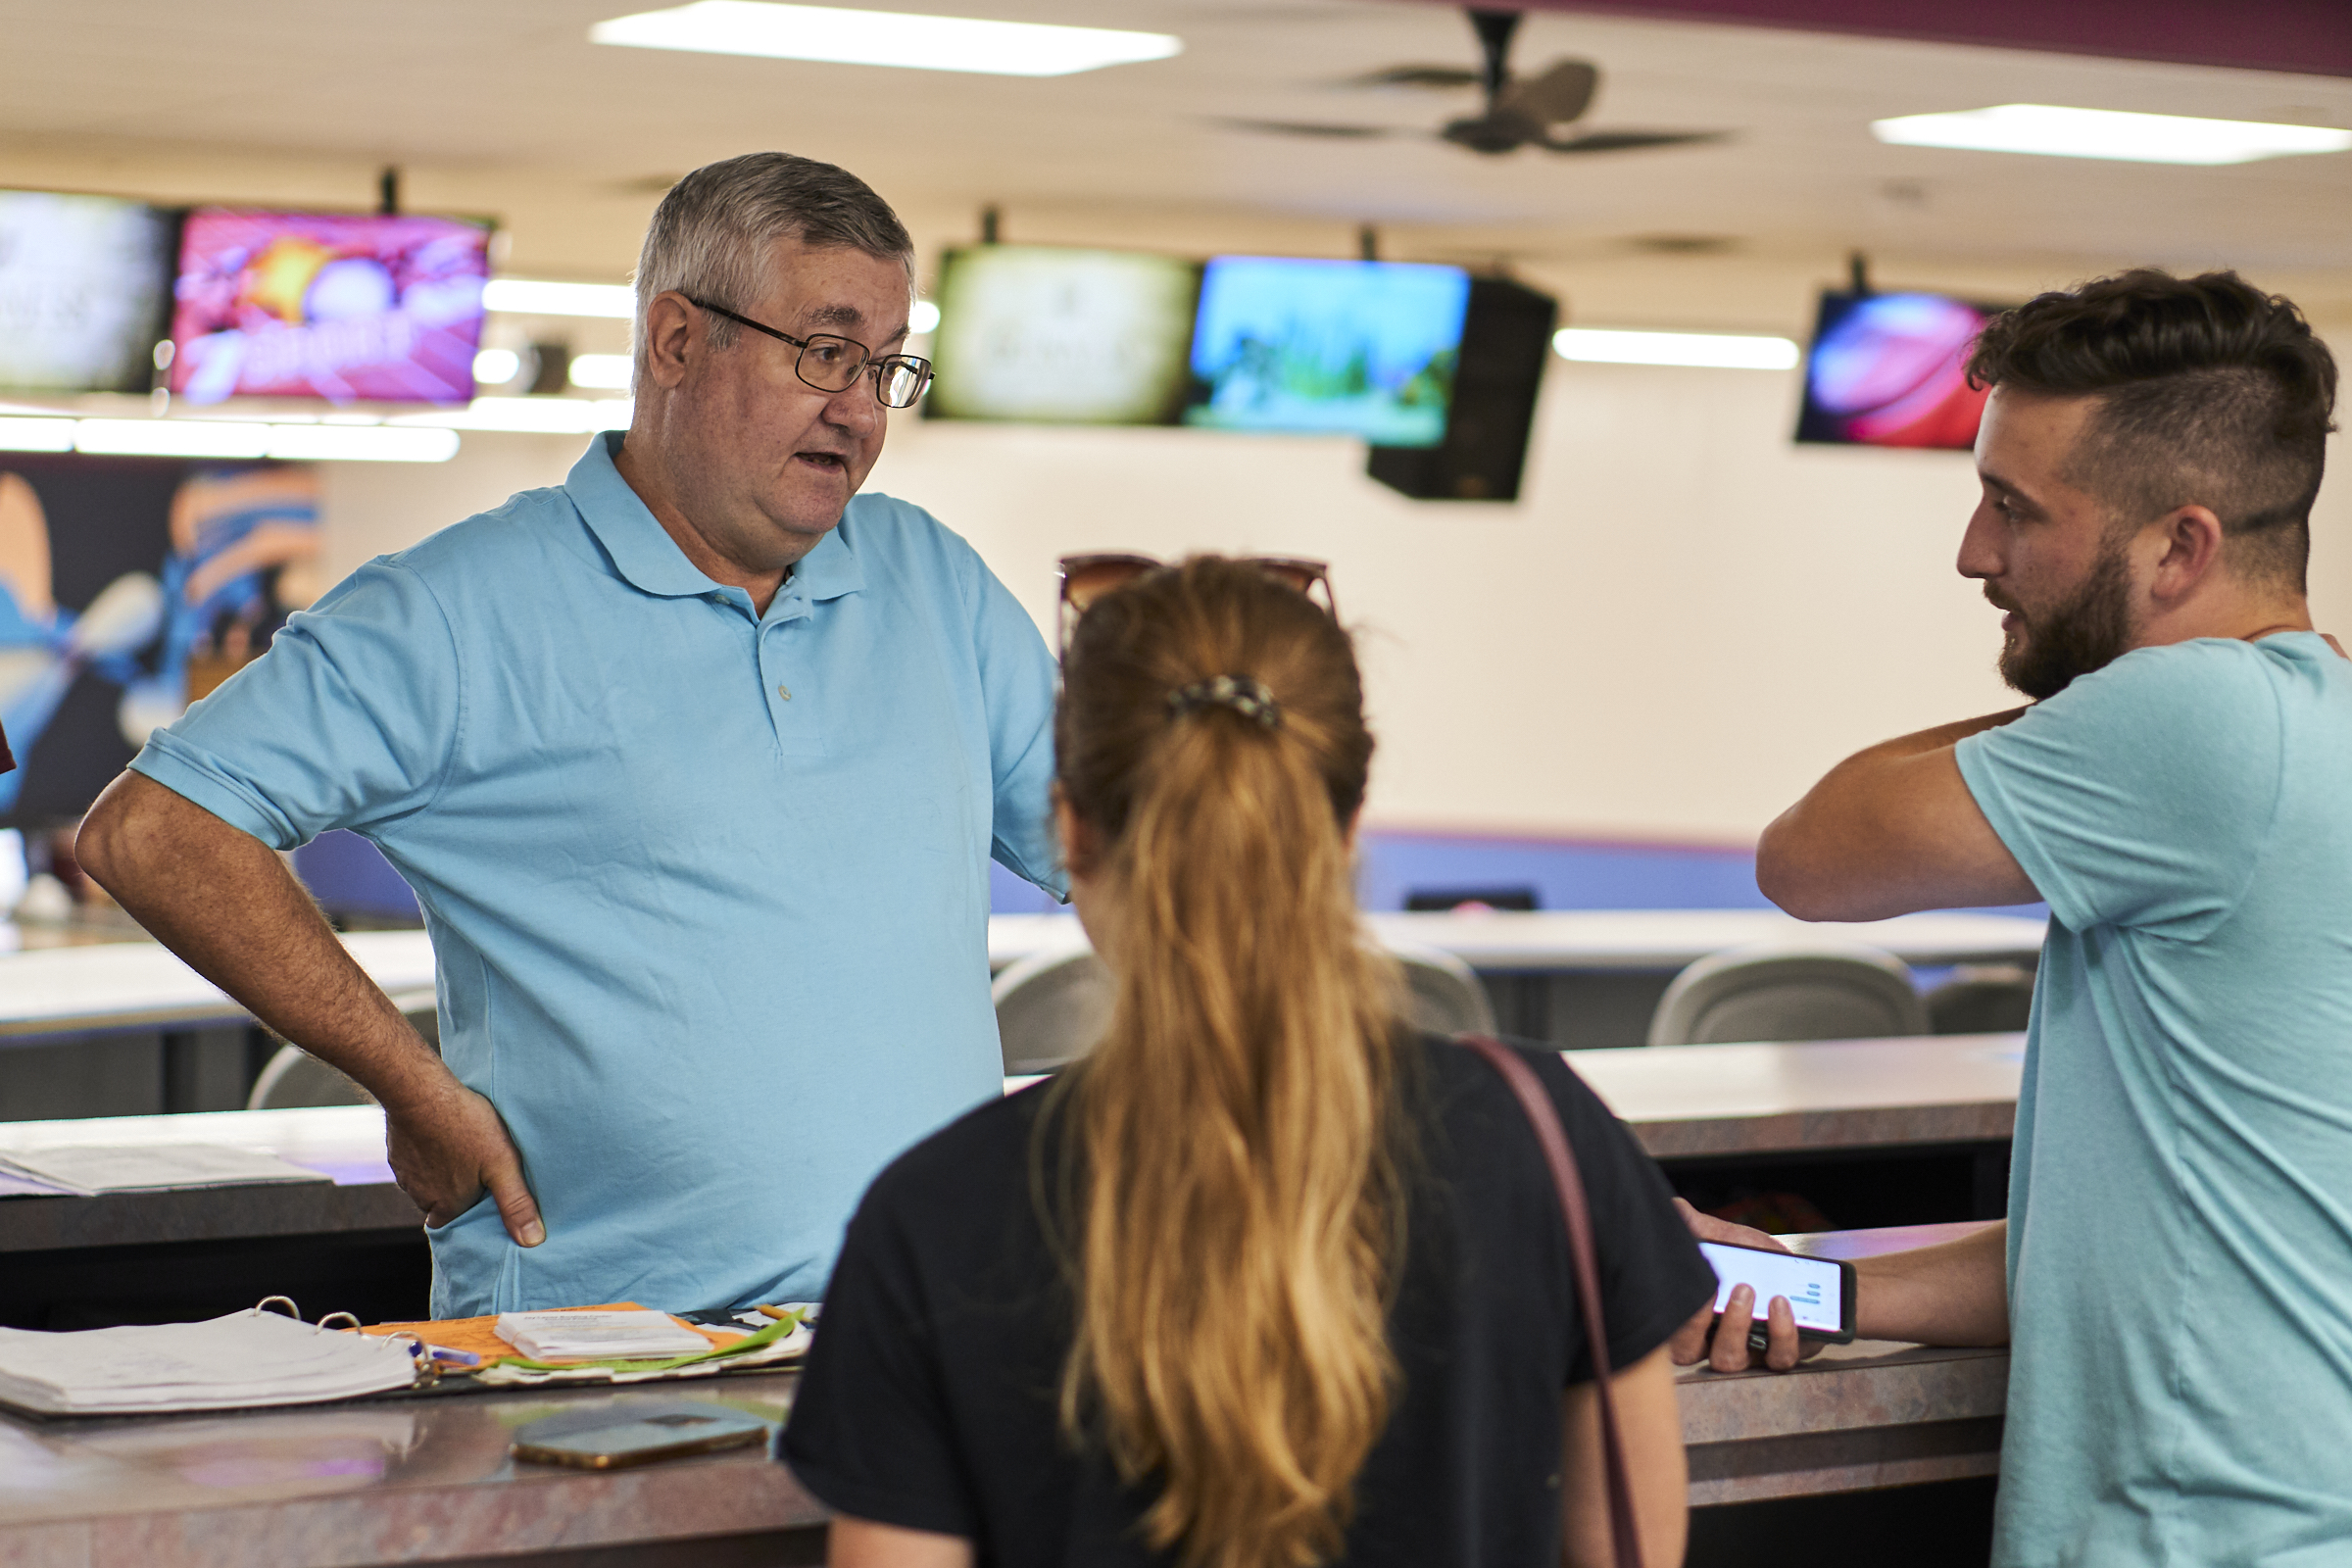 8 Reasons to Plan Your Next Party at a Bowling Center